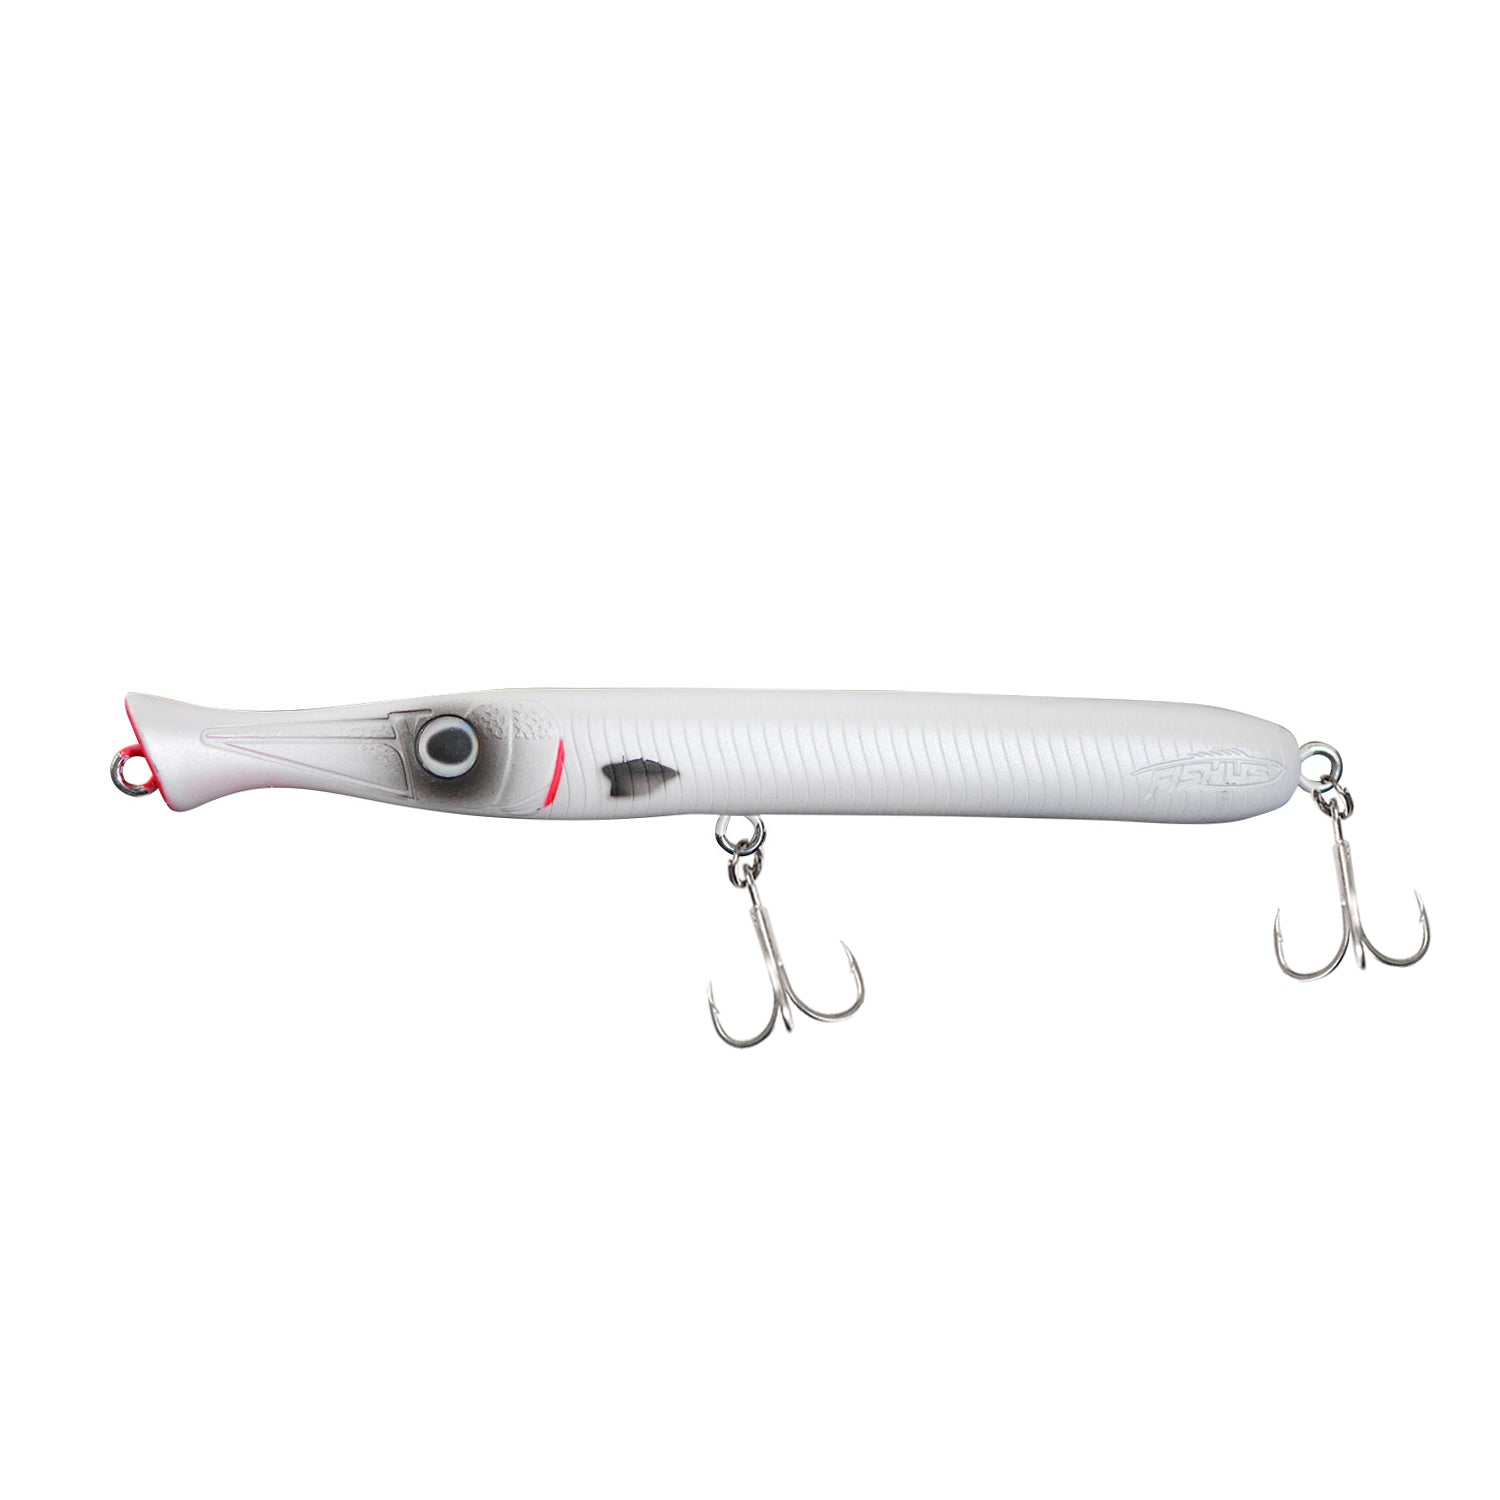 mini minnow fishing lure, mini minnow fishing lure Suppliers and  Manufacturers at